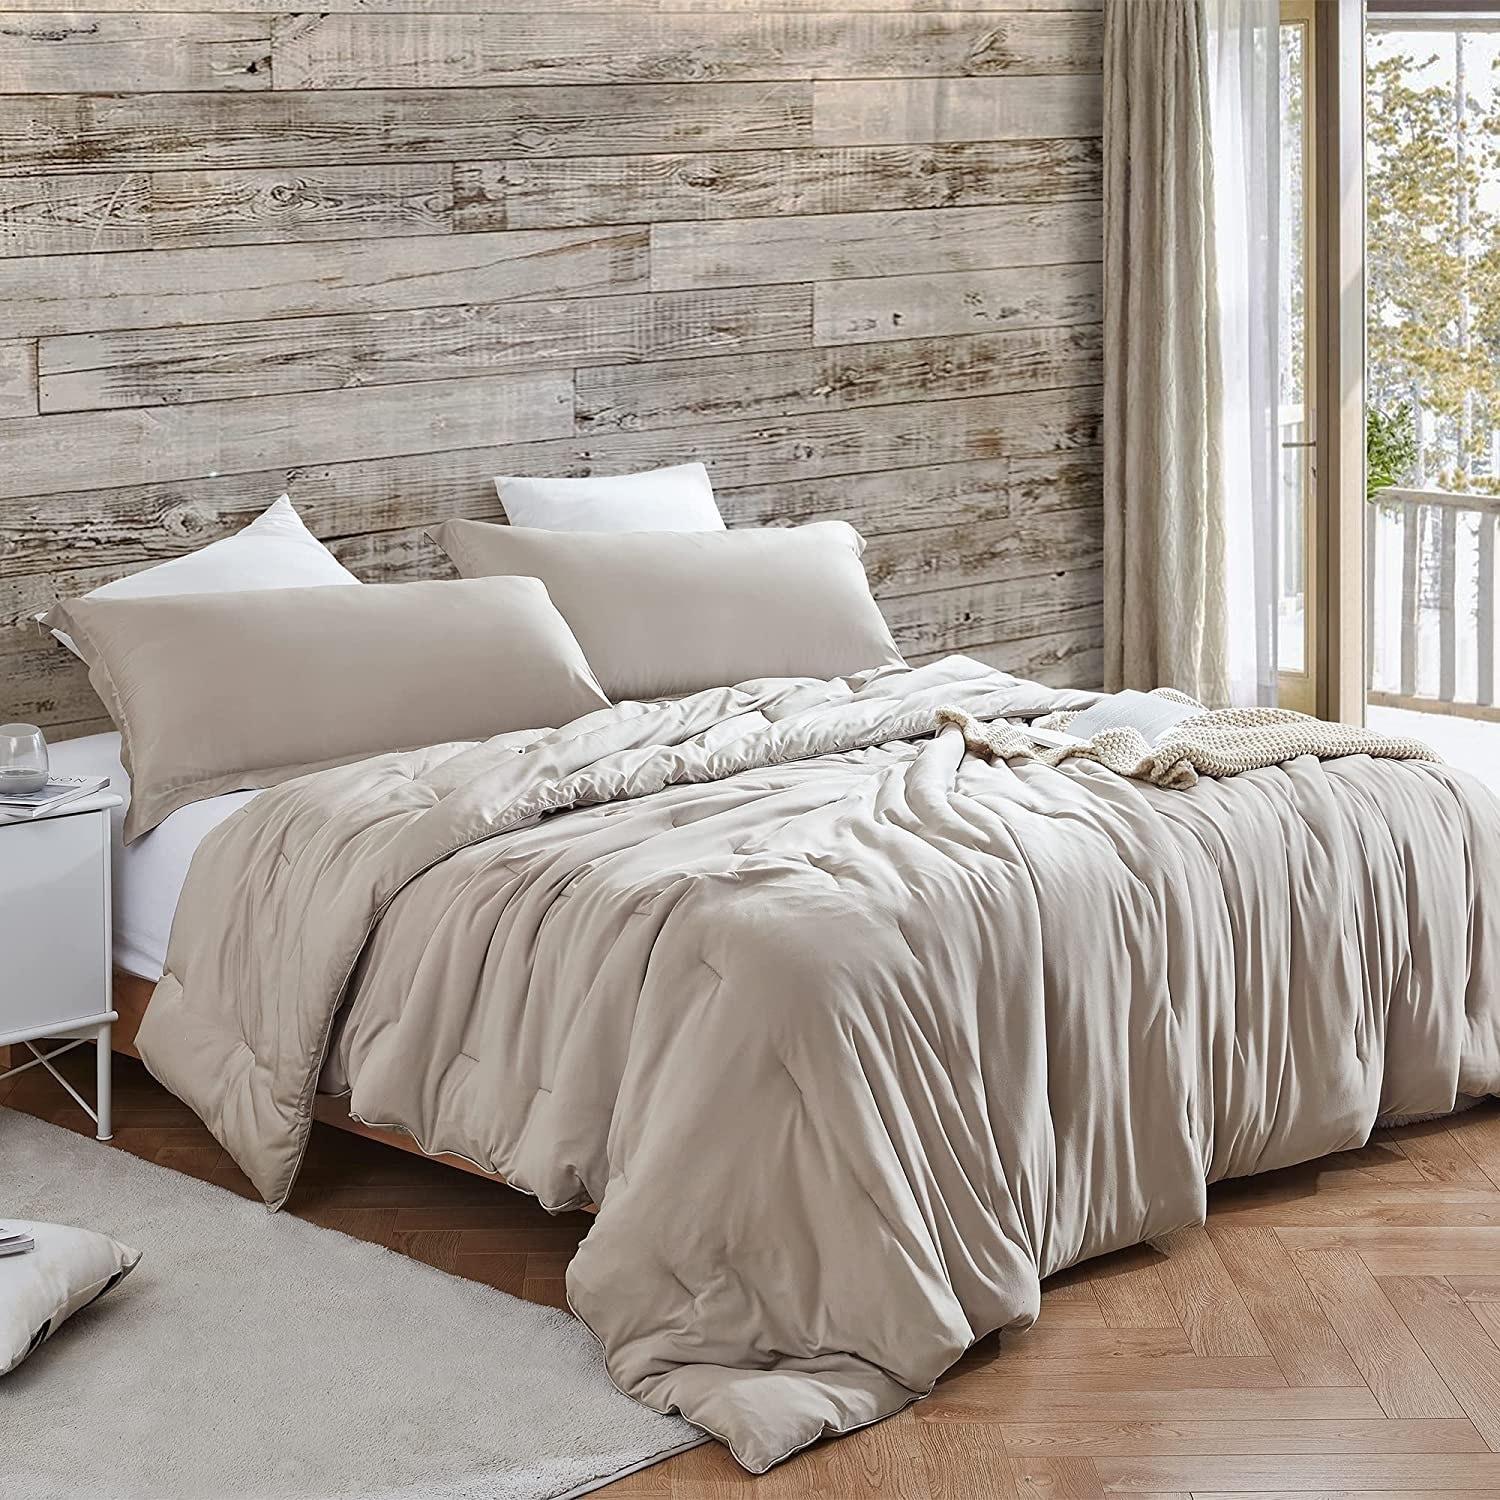 https://ak1.ostkcdn.com/images/products/is/images/direct/932261e06acbe729dfc62366e51880cb857368f4/Butter---Coma-Inducer%C2%AE-Oversized-Cooling-Comforter---Nashville-Nights.jpg